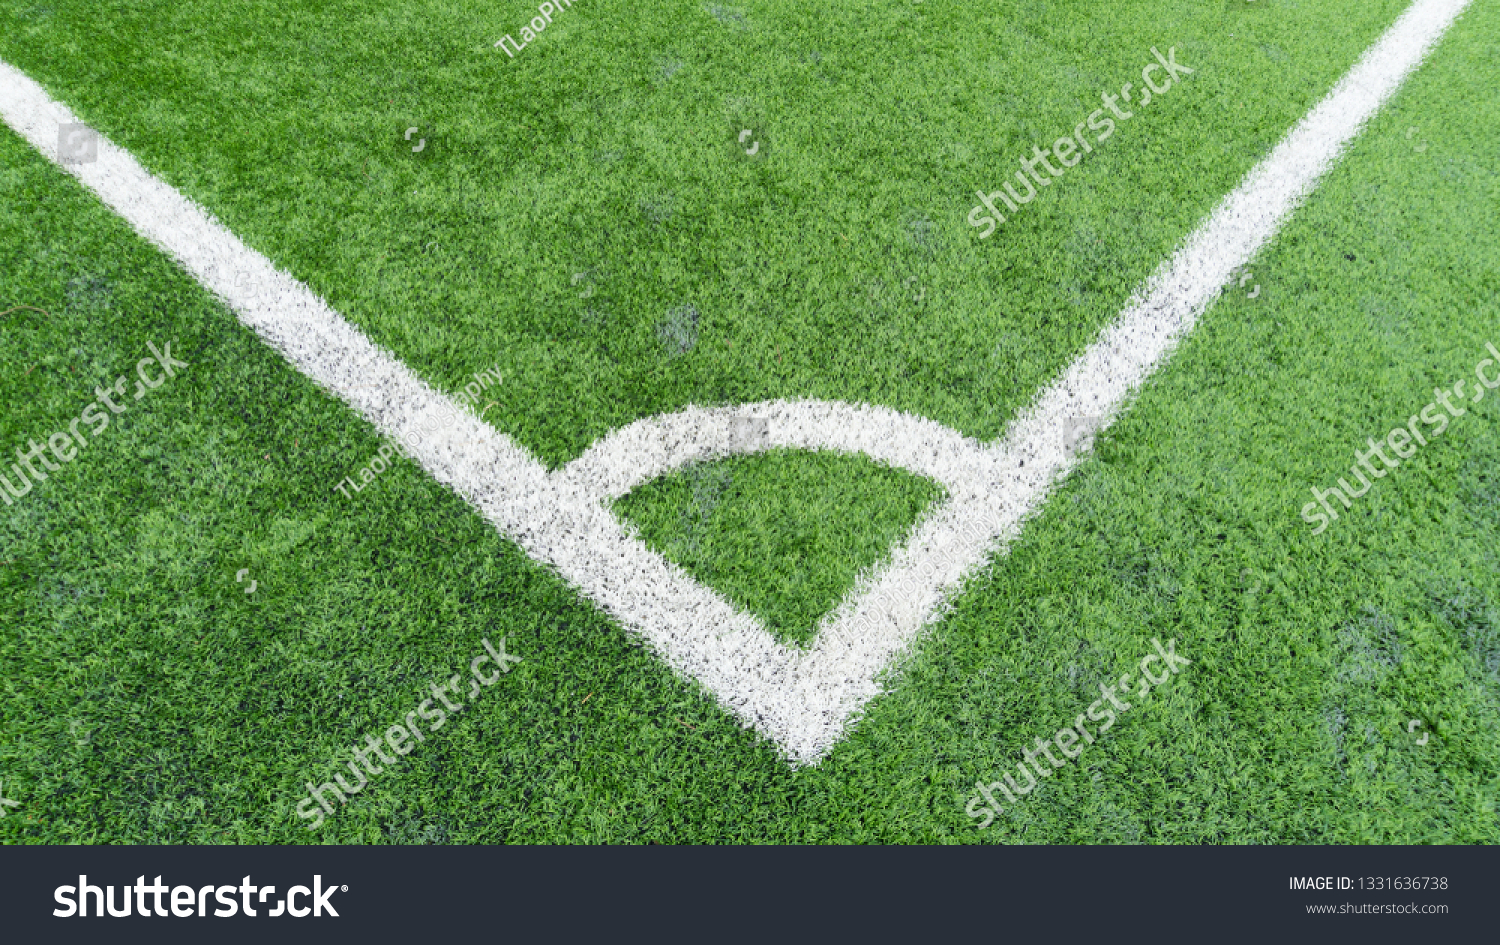 Stadium of football or soccer field with green grass #1331636738